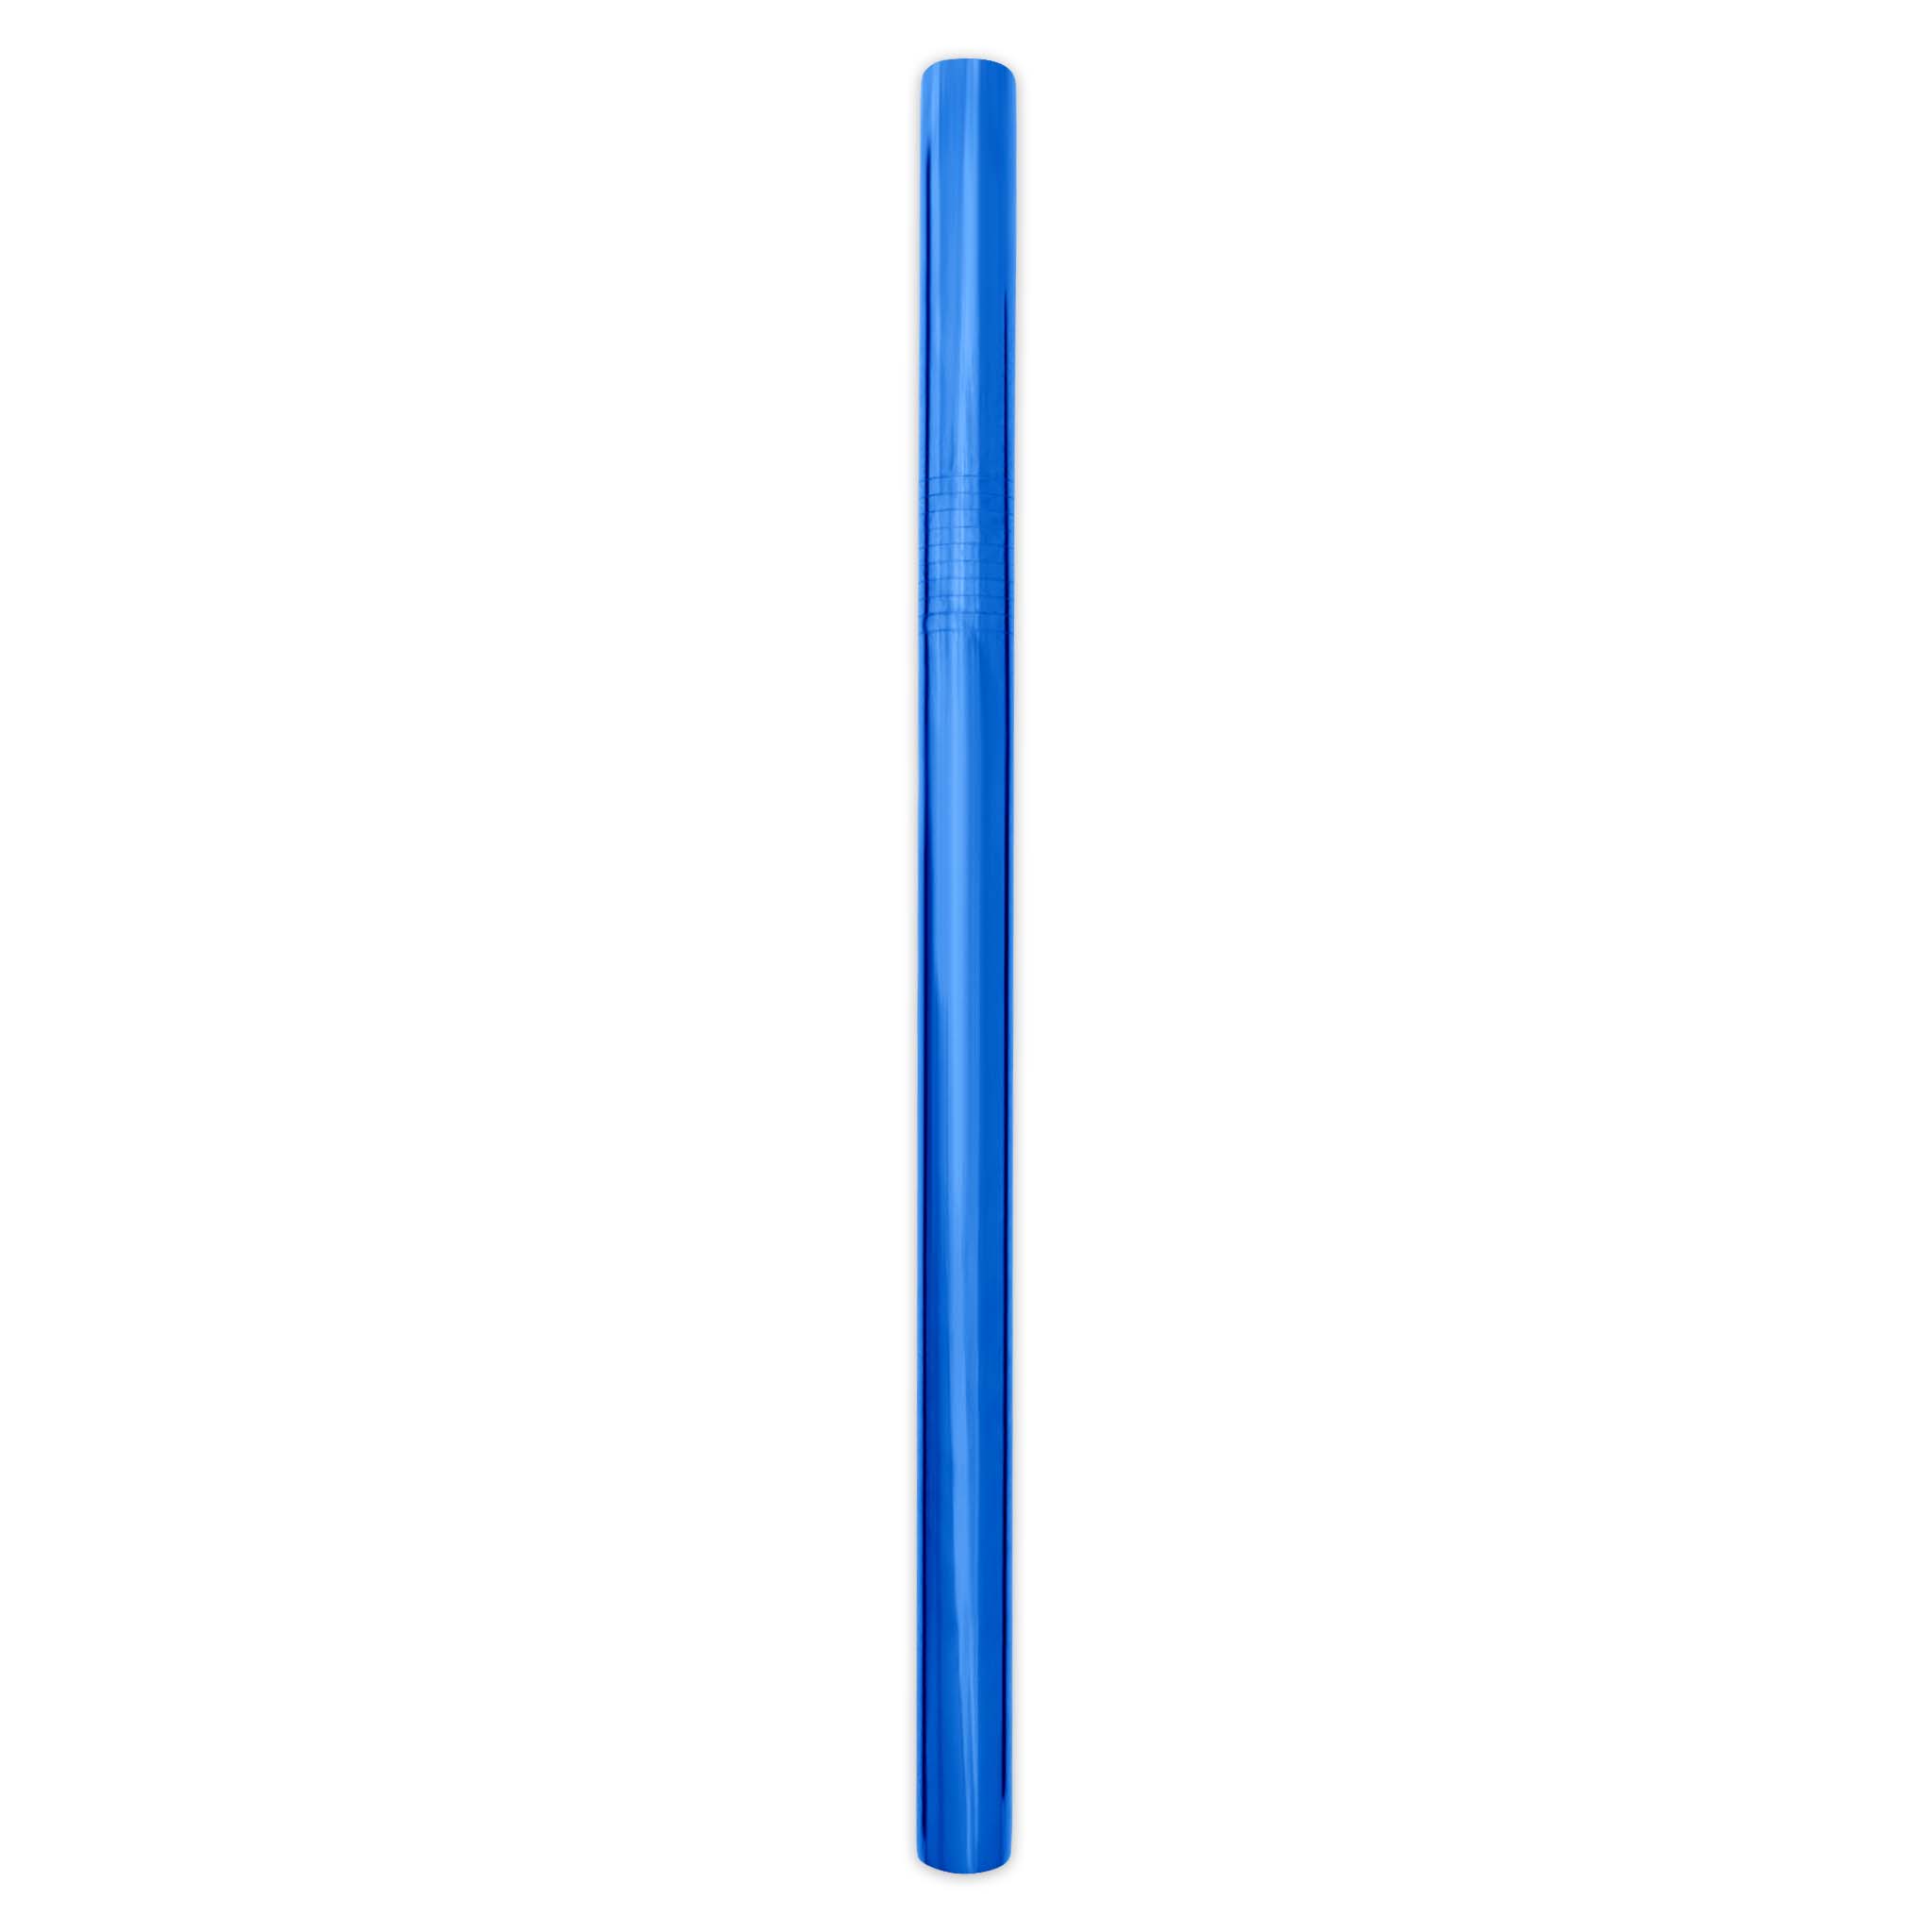 Reusable Stainless Steel Smoothie Straw (Blue)